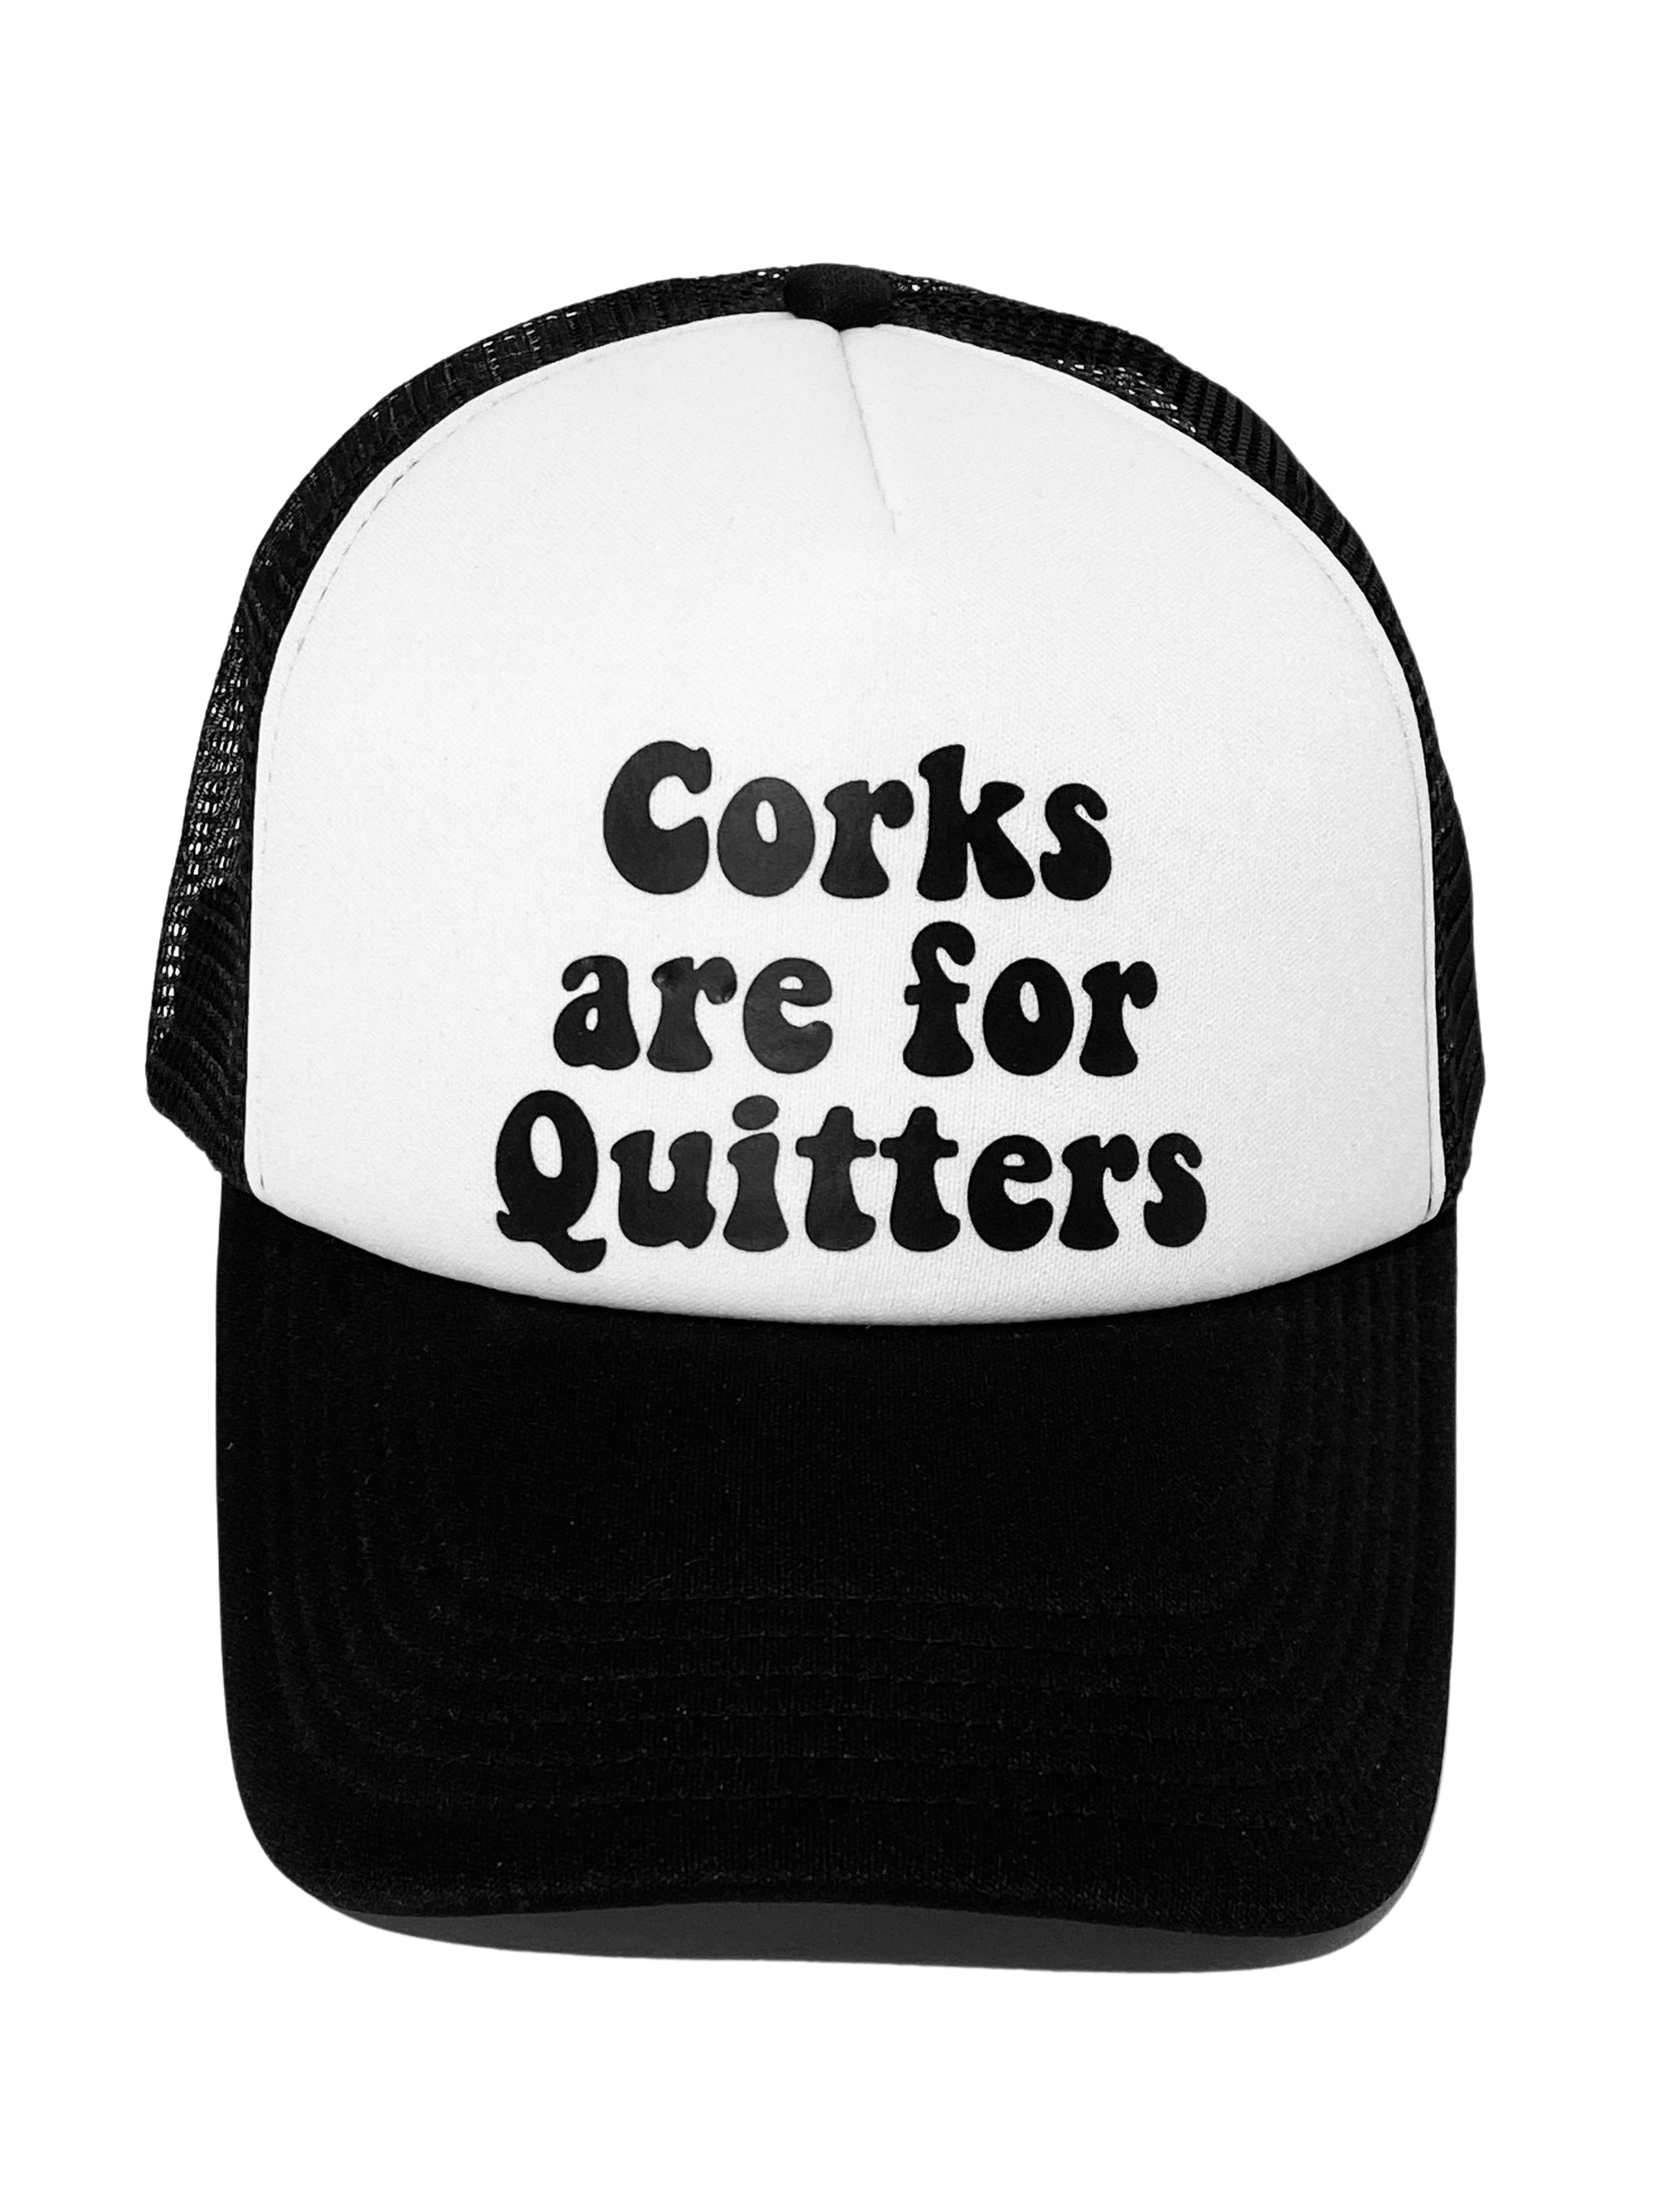 Corks Are For Quitters Trucker Hat